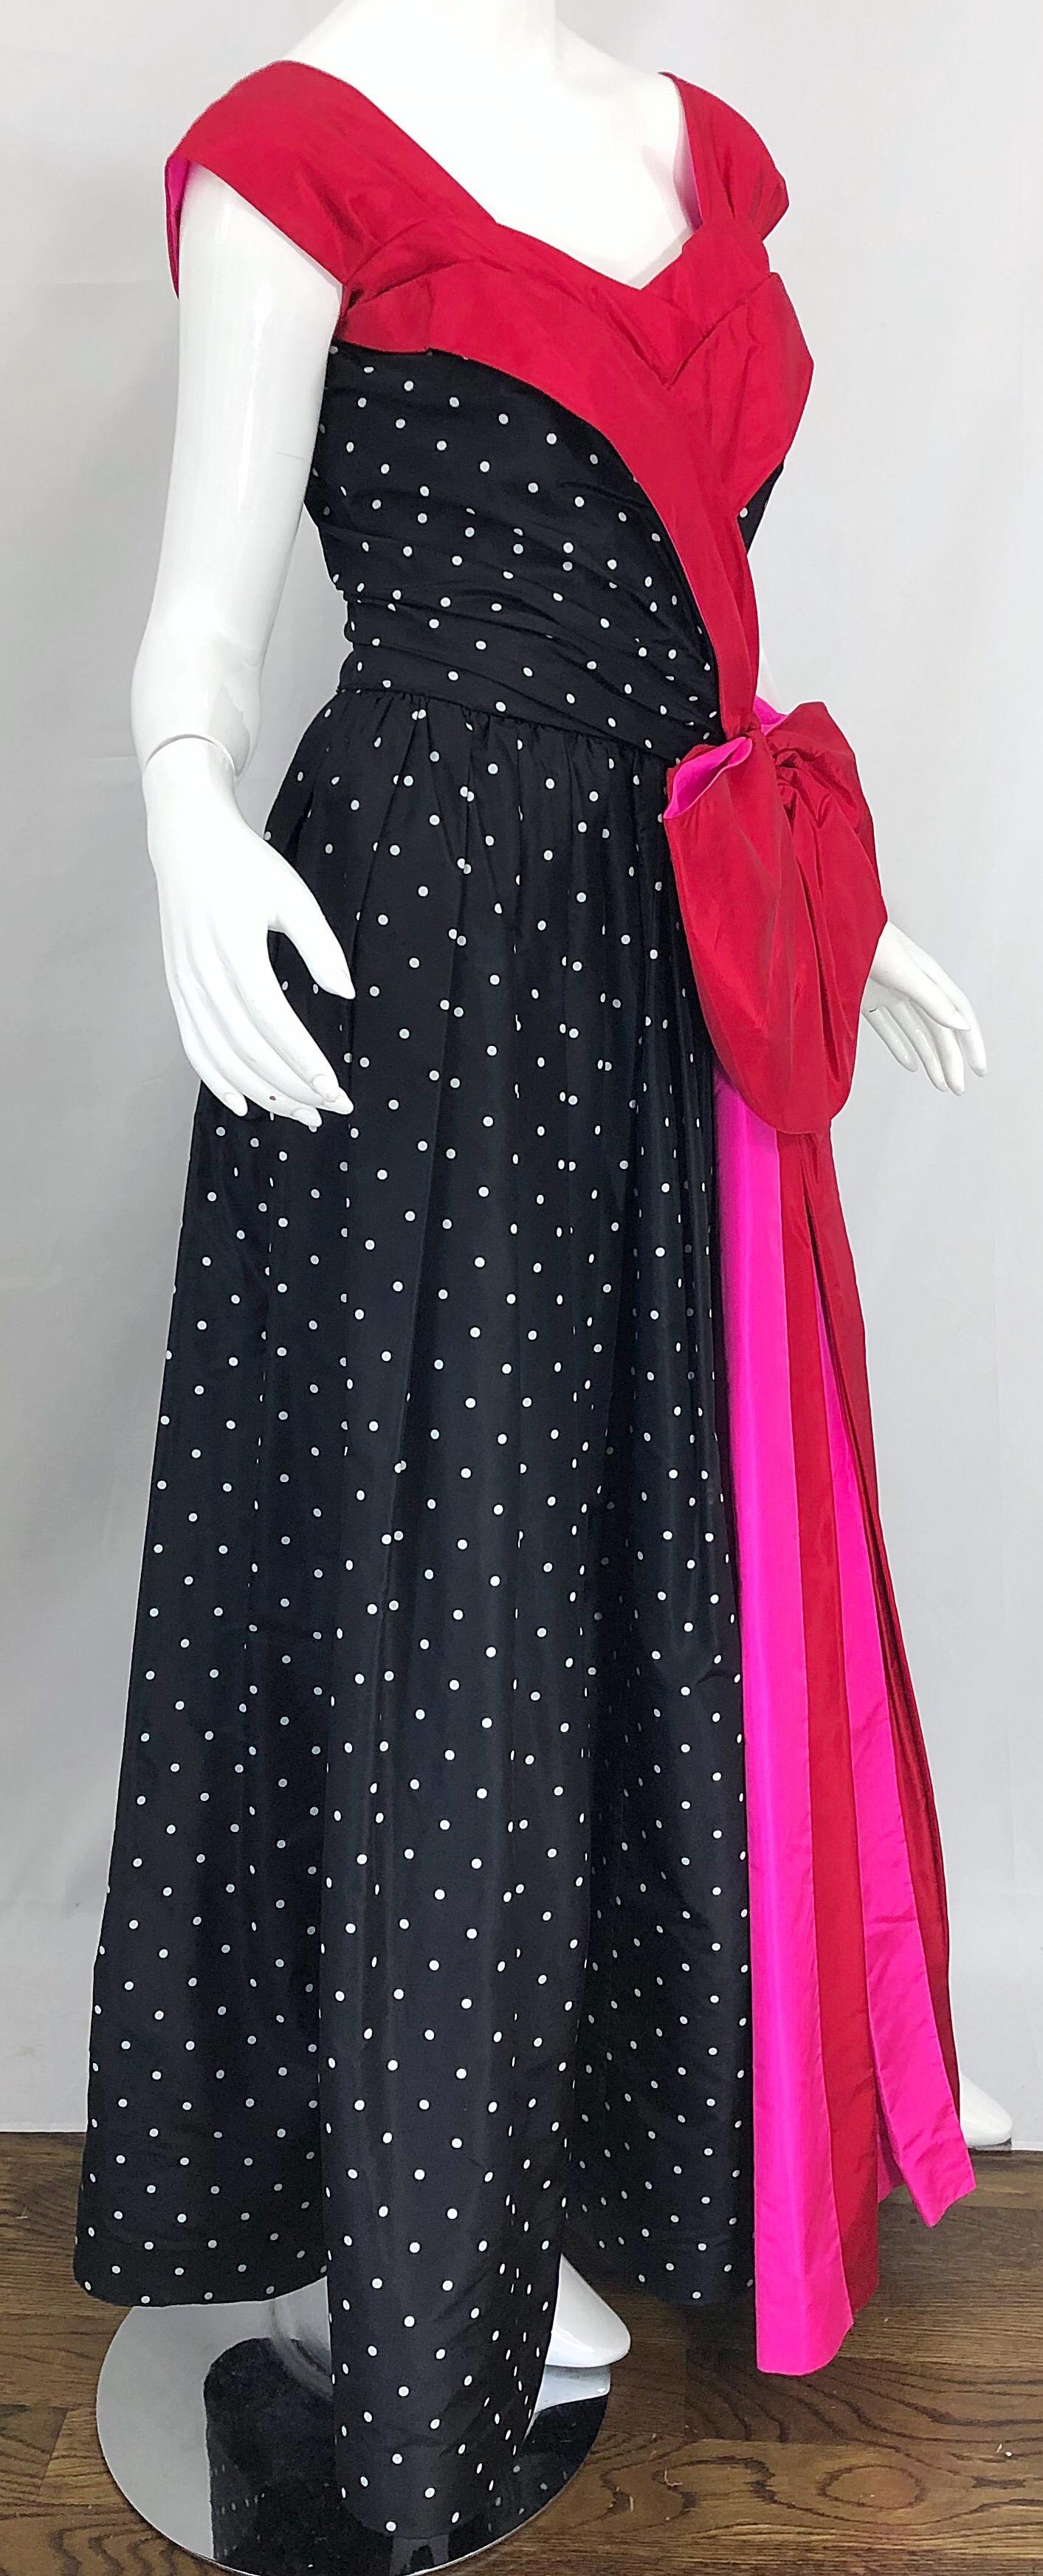 Vintage Nina Ricci Couture 1980s Avant Garde Polka Dot Silk Taffeta Evening Gown In Excellent Condition For Sale In San Diego, CA